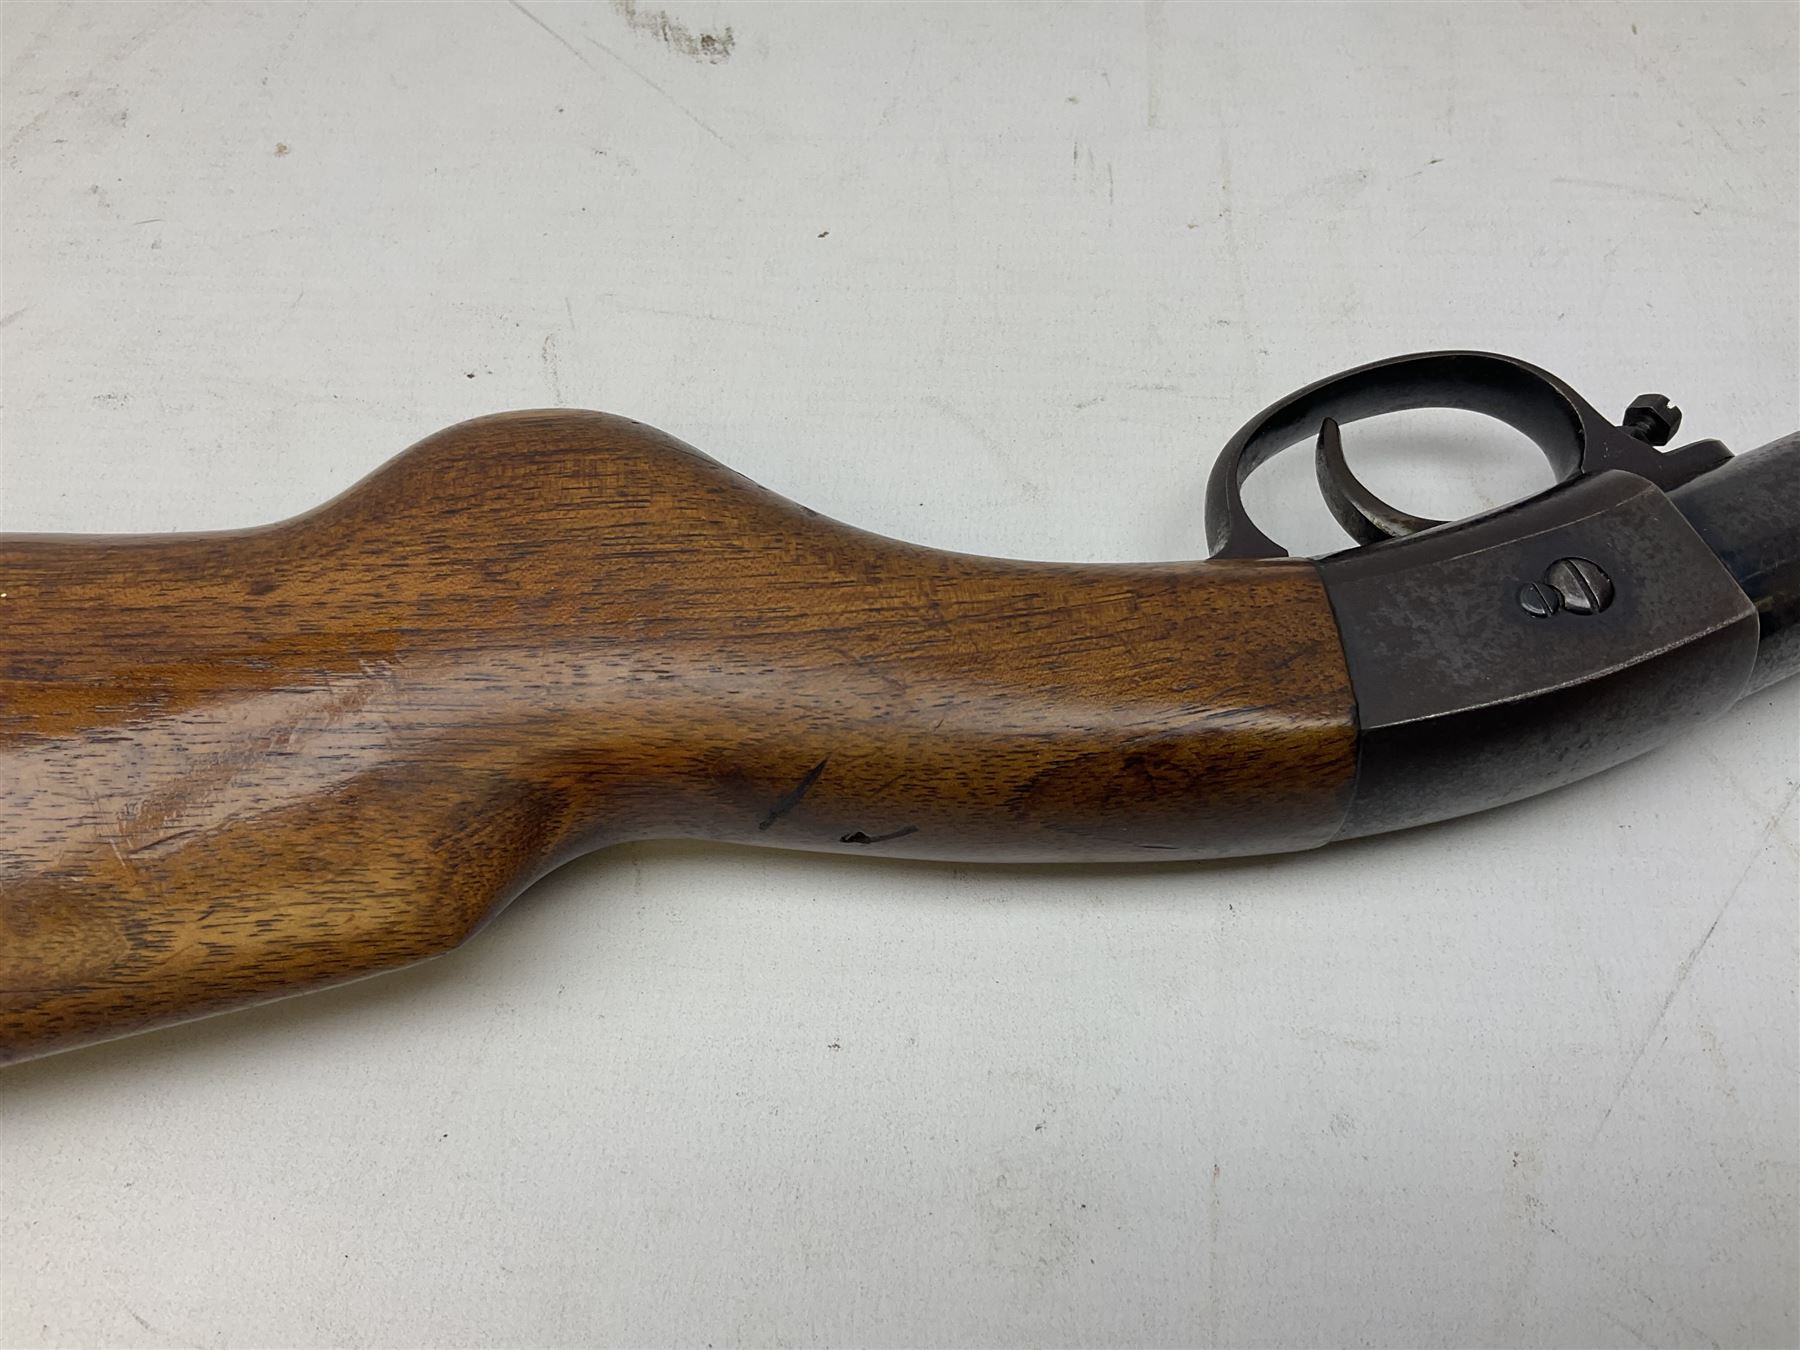 Diana Model 27 .177 air rifle with under lever action and walnut stock L108cm - Image 13 of 16